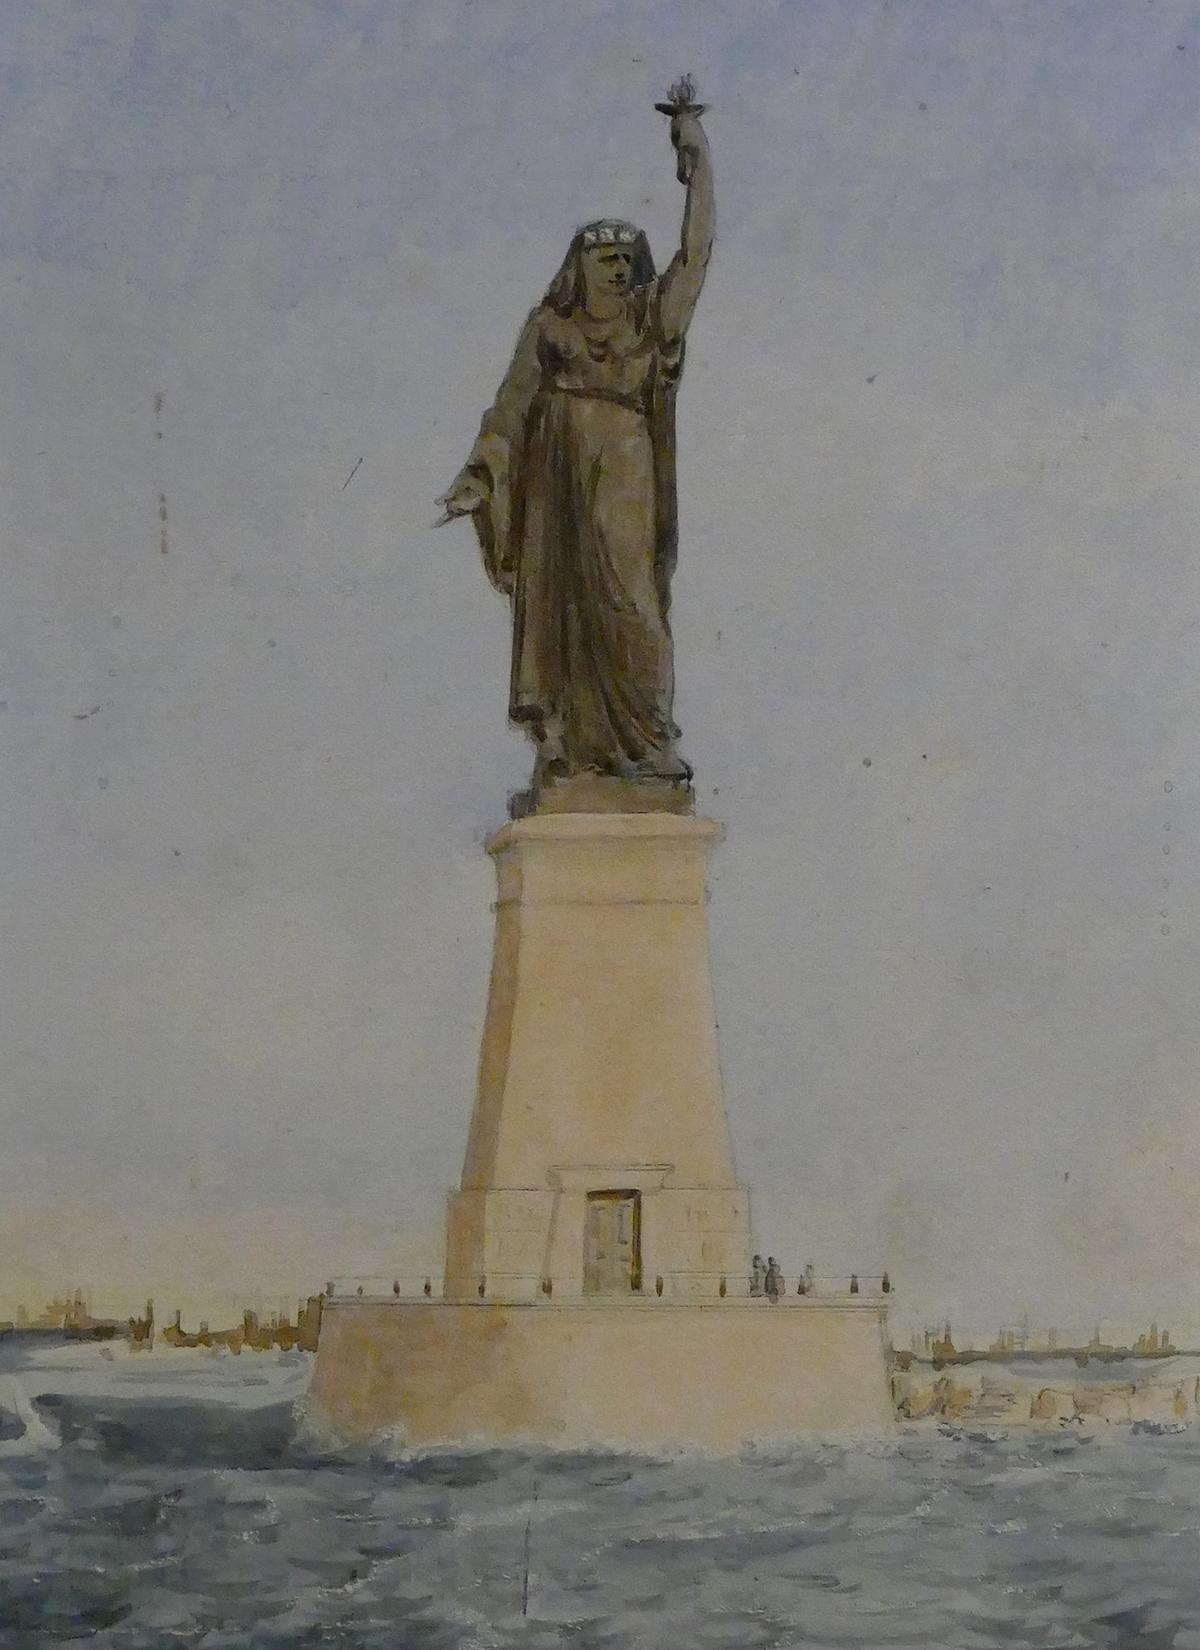 Bartholdi's conceptual rendering for a monumental statue at the entrance to the port of Suez. "Egypt Carrying the Light to Asia" (also known as "Progress Carrying the Light to Asia"), 1869, by Frédéric Auguste Bartholdi. Watercolor. Bartholdi Museum, Colmar, France. (Public Domain)